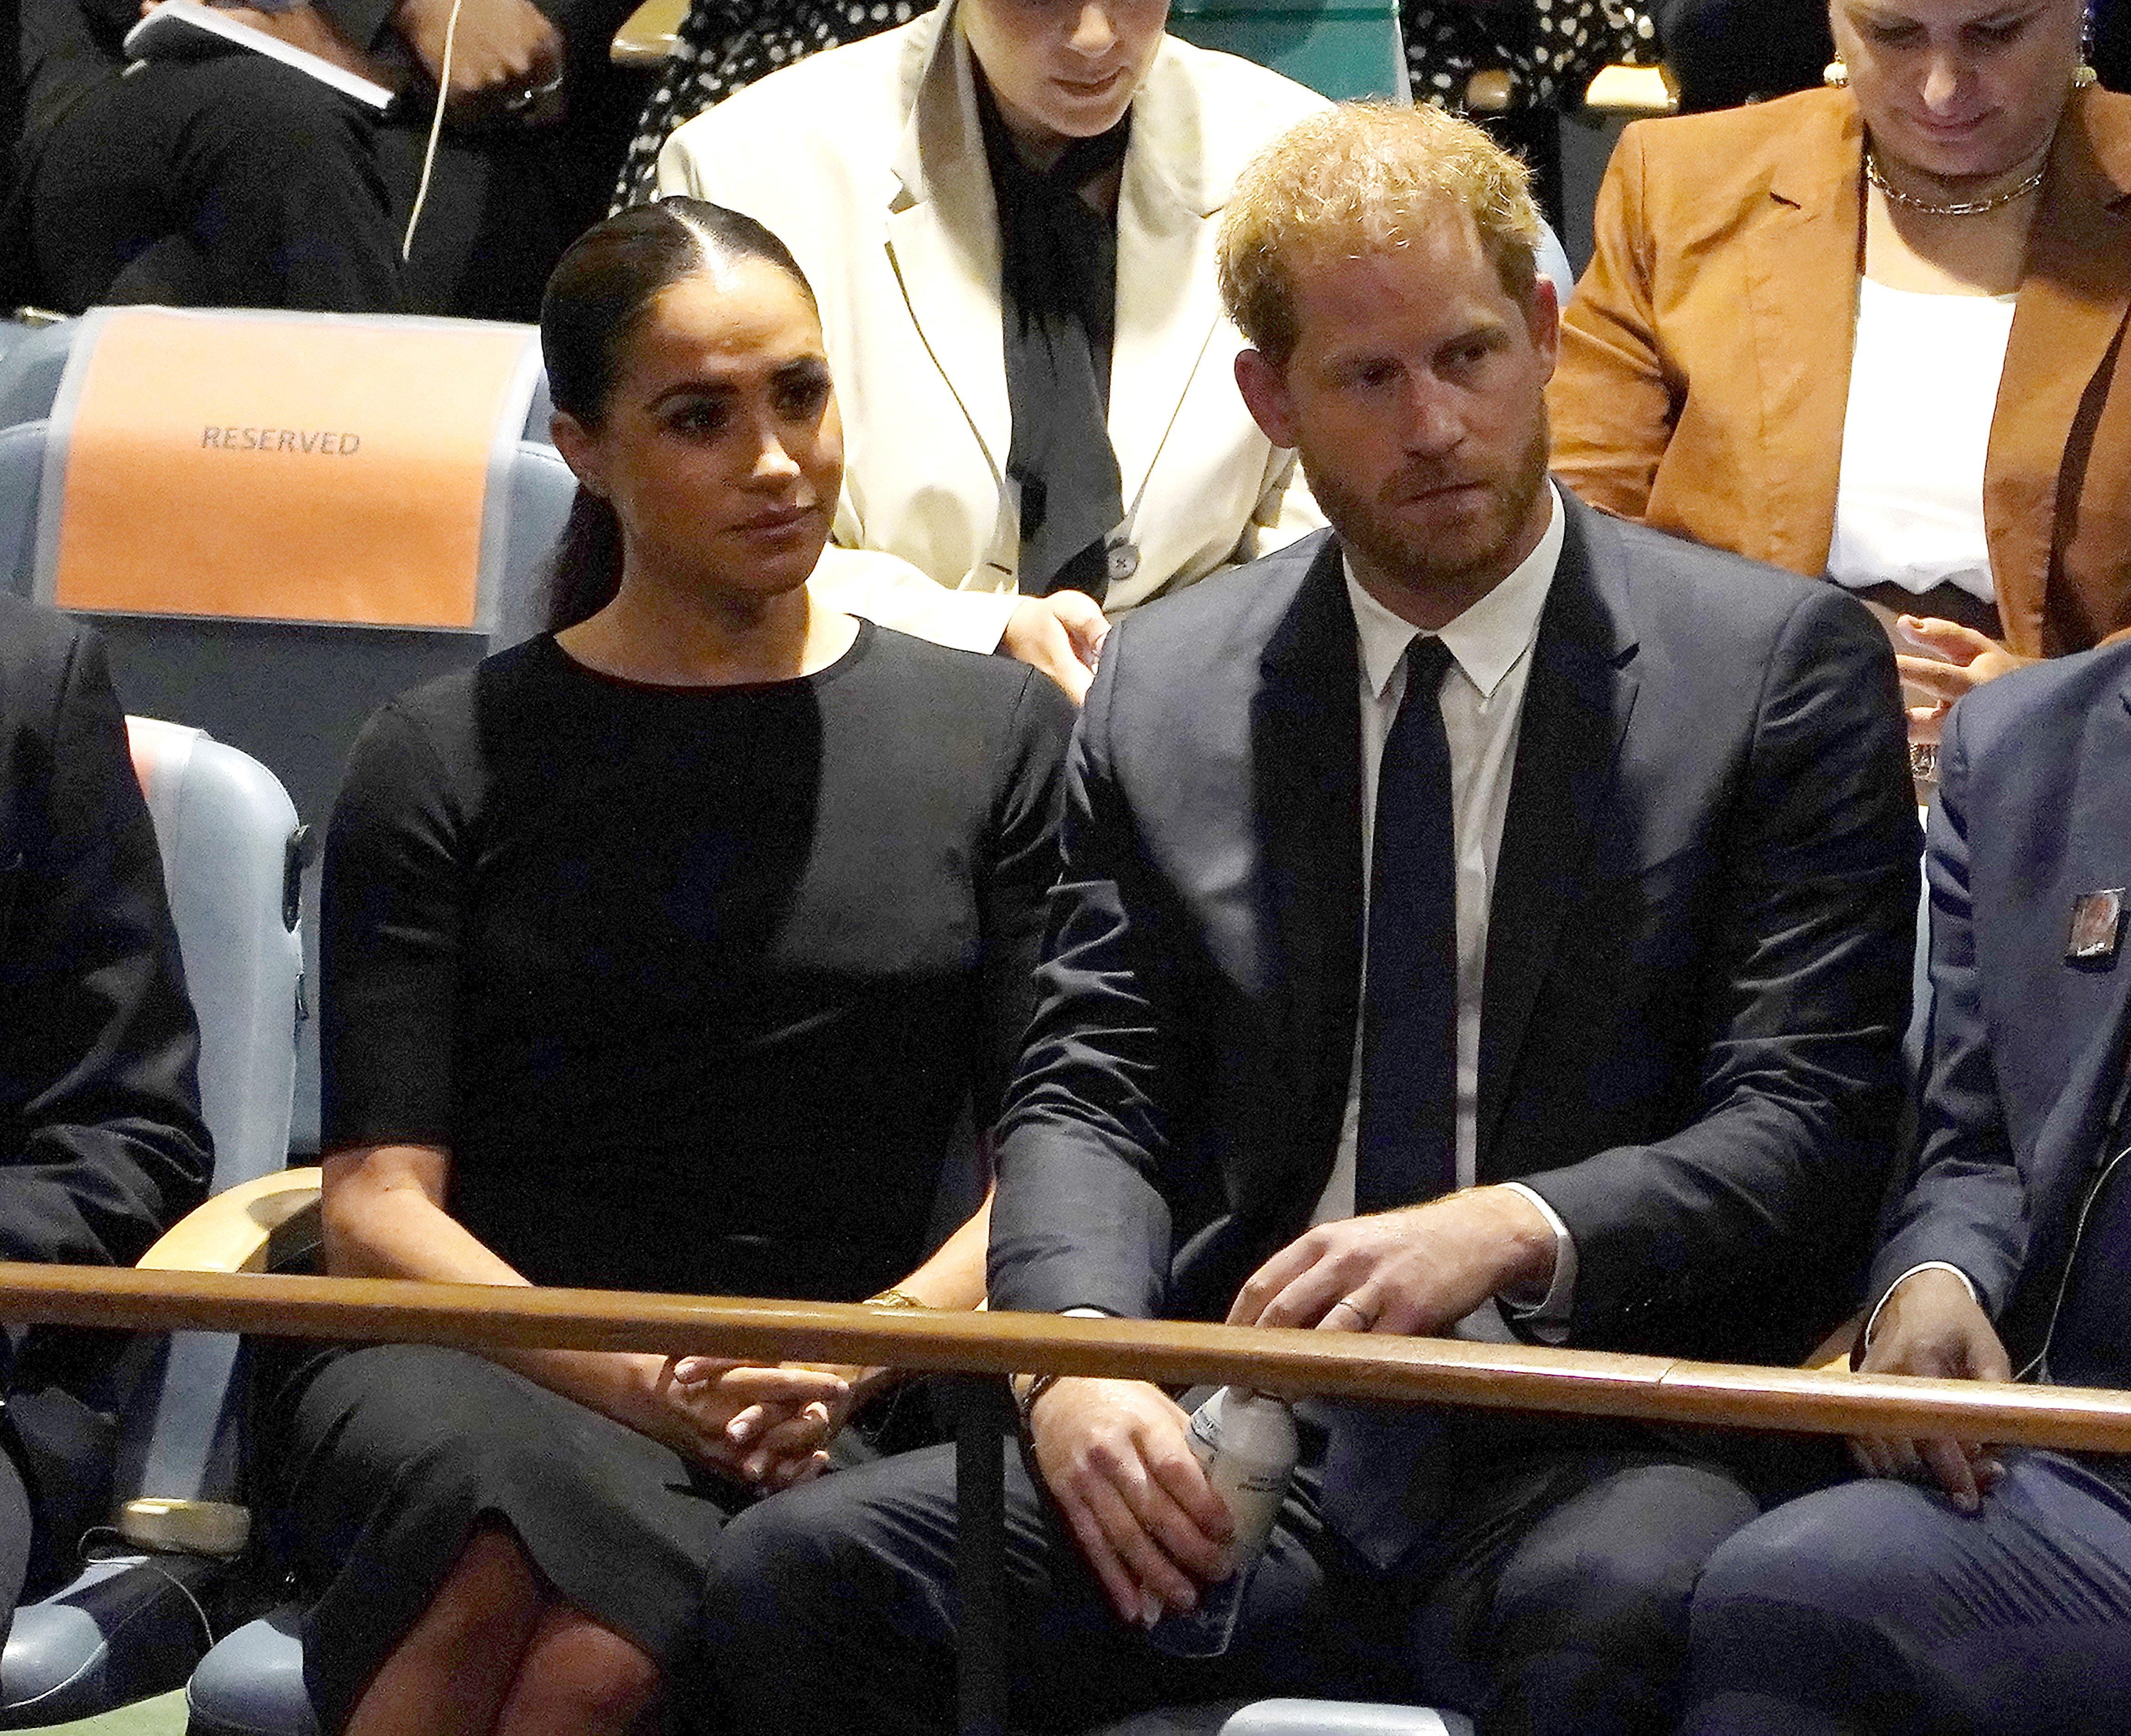 Prince Harry and Meghan Markle listen to speakers at the UN General Assembly